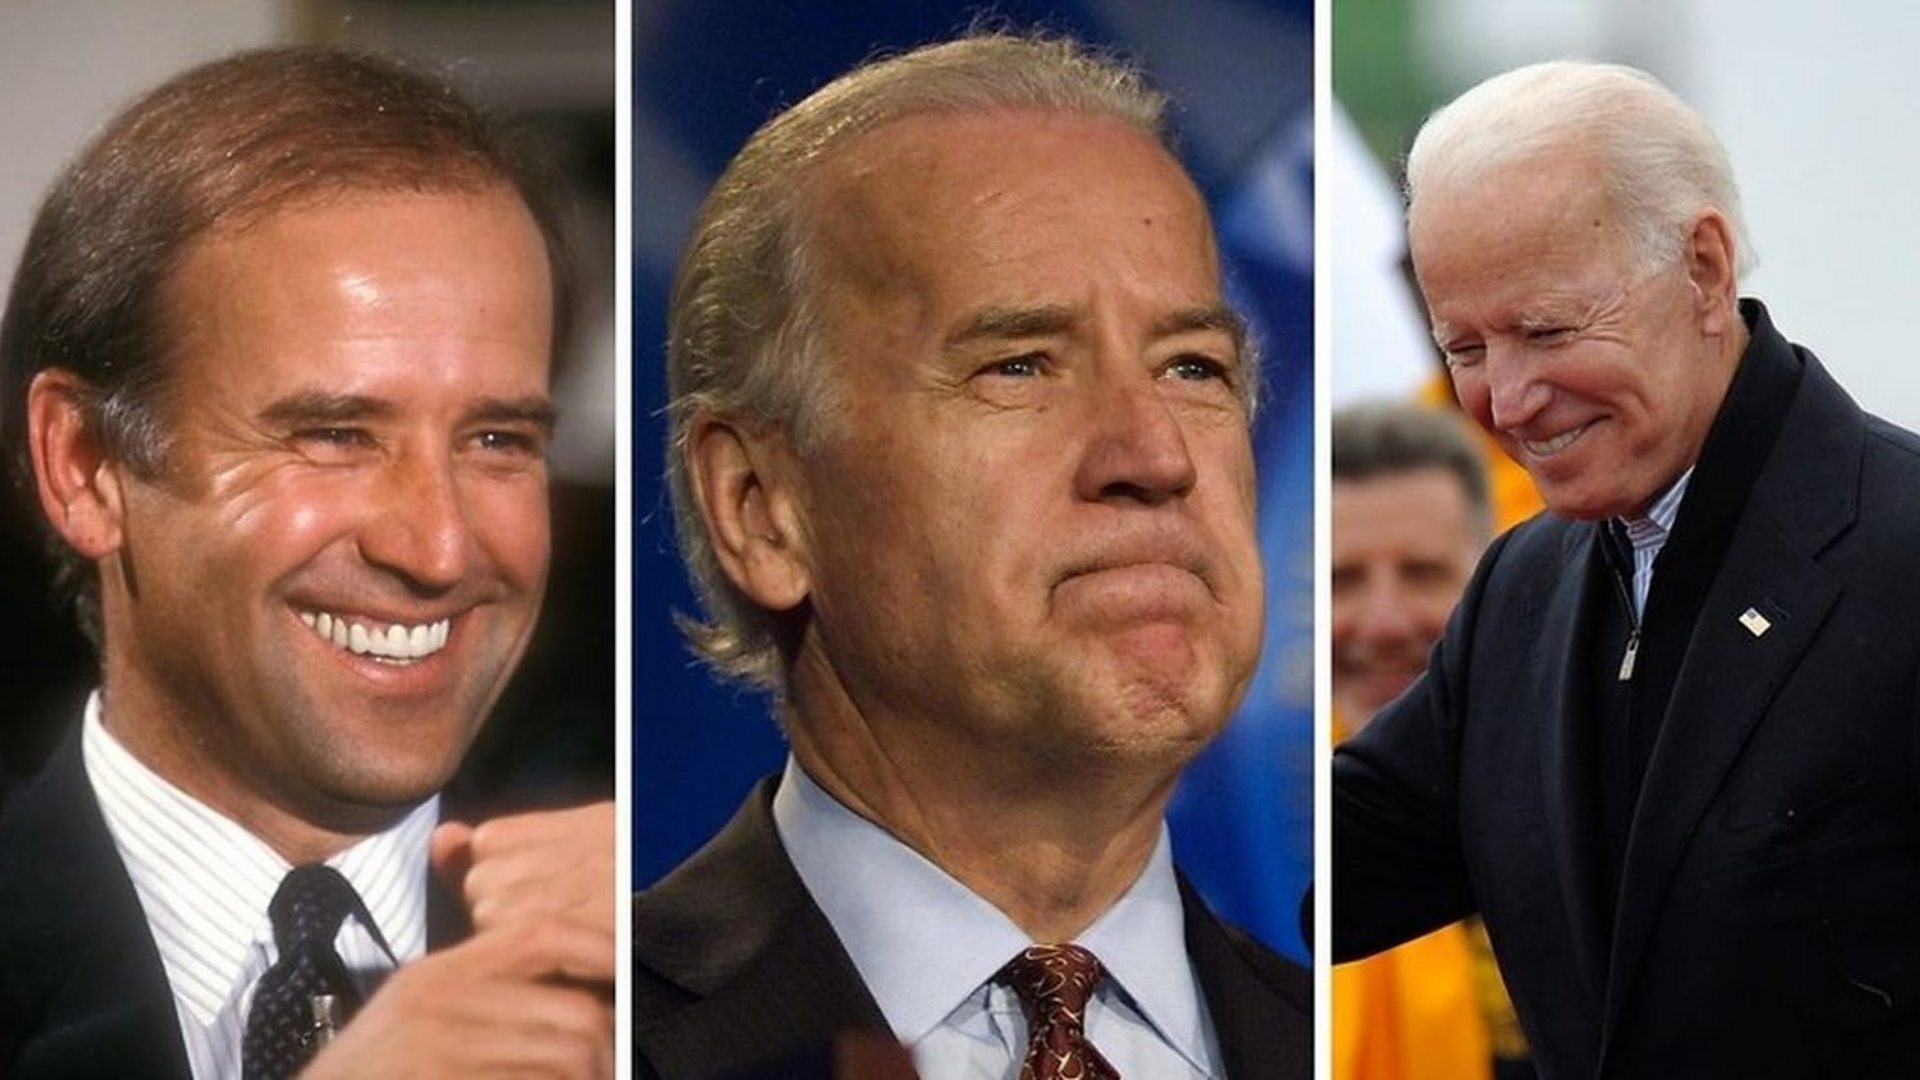 how much did joe biden raise in the third quarter - Biden|President|Joe|Years|Trump|Delaware|Vice|Time|Obama|Senate|States|Law|Age|Campaign|Election|Administration|Family|House|Senator|Office|School|Wife|People|Hunter|University|Act|State|Year|Life|Party|Committee|Children|Beau|Daughter|War|Jill|Day|Facts|Americans|Presidency|Joe Biden|United States|Vice President|White House|Law School|President Trump|Foreign Relations Committee|Donald Trump|President Biden|Presidential Campaign|Presidential Election|Democratic Party|Syracuse University|United Nations|Net Worth|Barack Obama|Judiciary Committee|Neilia Hunter|U.S. Senate|Hillary Clinton|New York Times|Obama Administration|Empty Store Shelves|Systemic Racism|Castle County Council|Archmere Academy|U.S. Senator|Vice Presidency|Second Term|Biden Administration